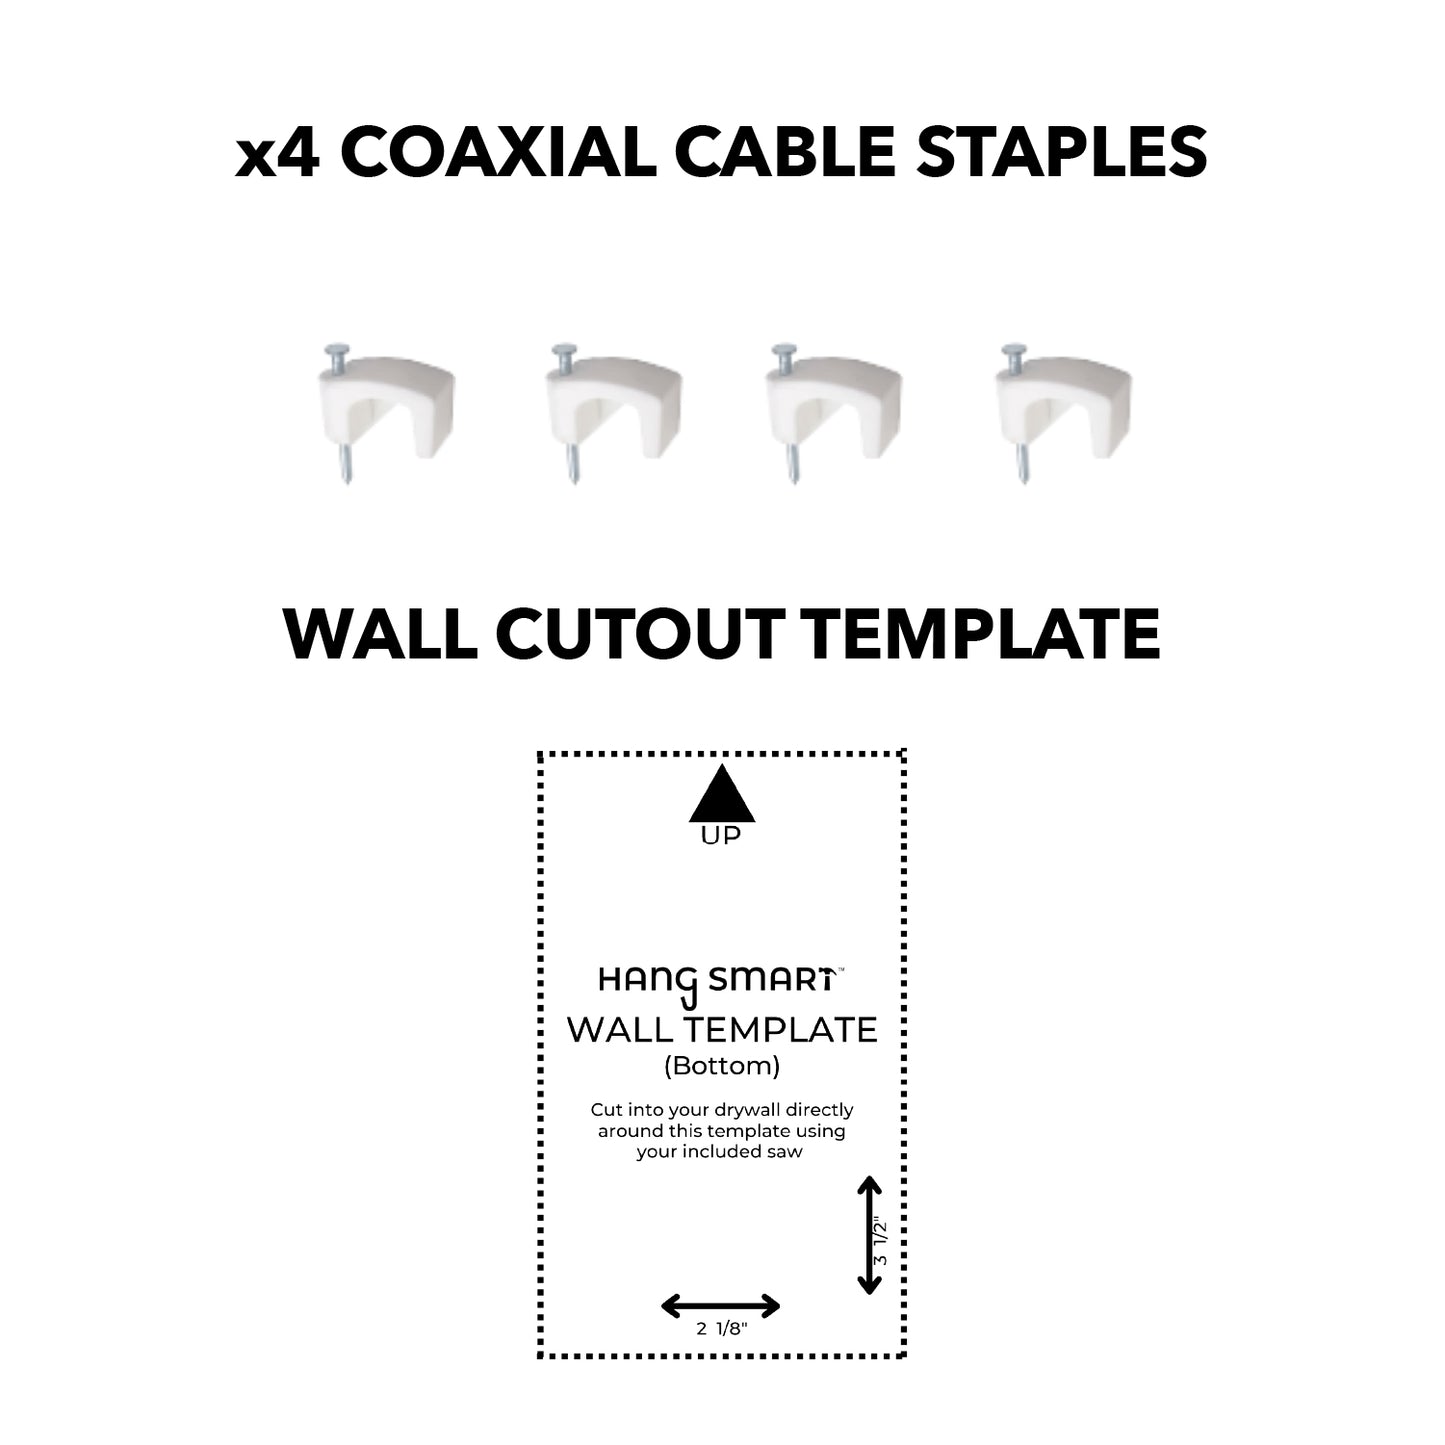 4 coaxial cable staples with wall cutout template